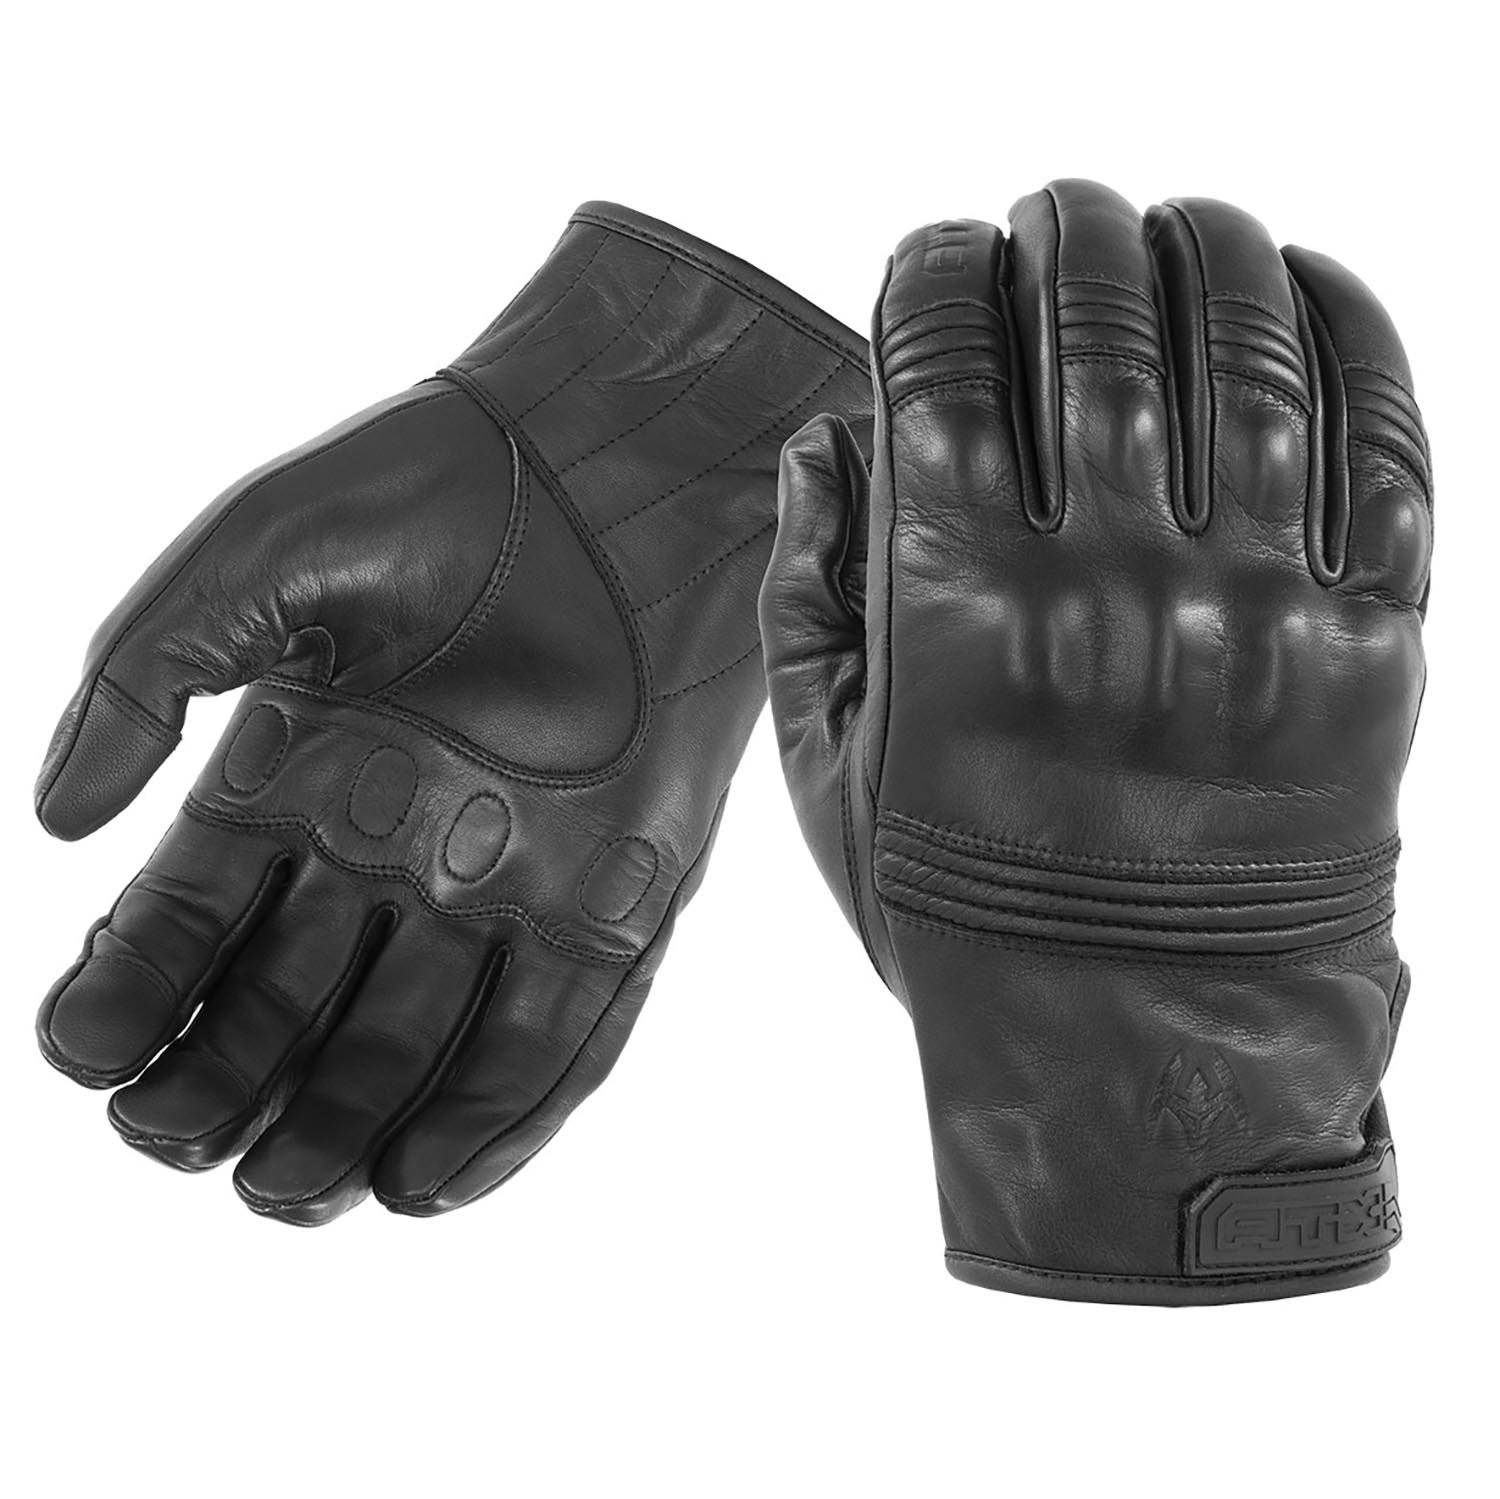 Damascus All-Leather Duty Gloves with Knuckle Armor